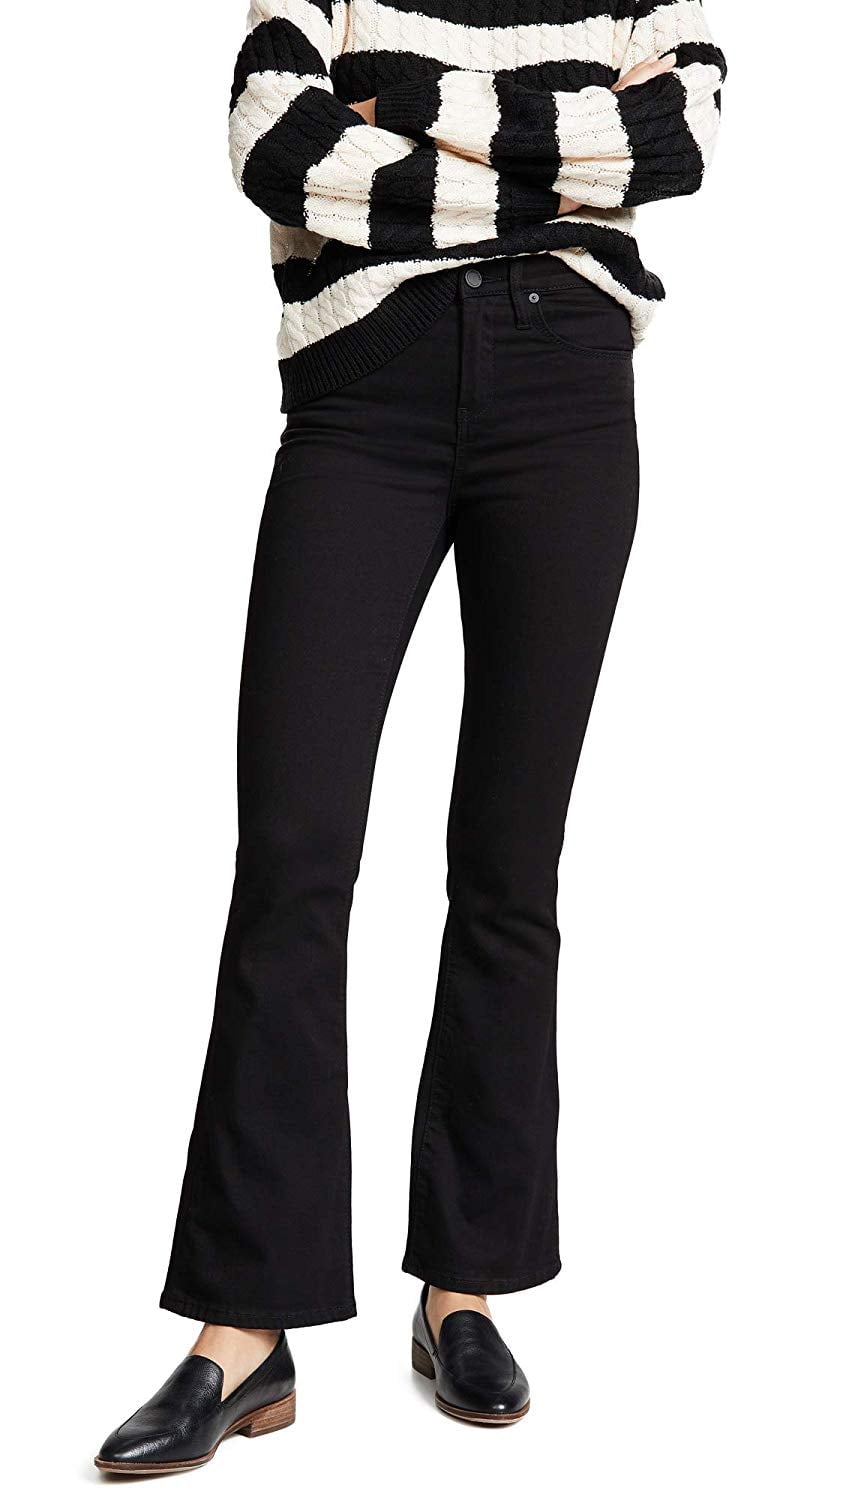 high rise jeans amazon